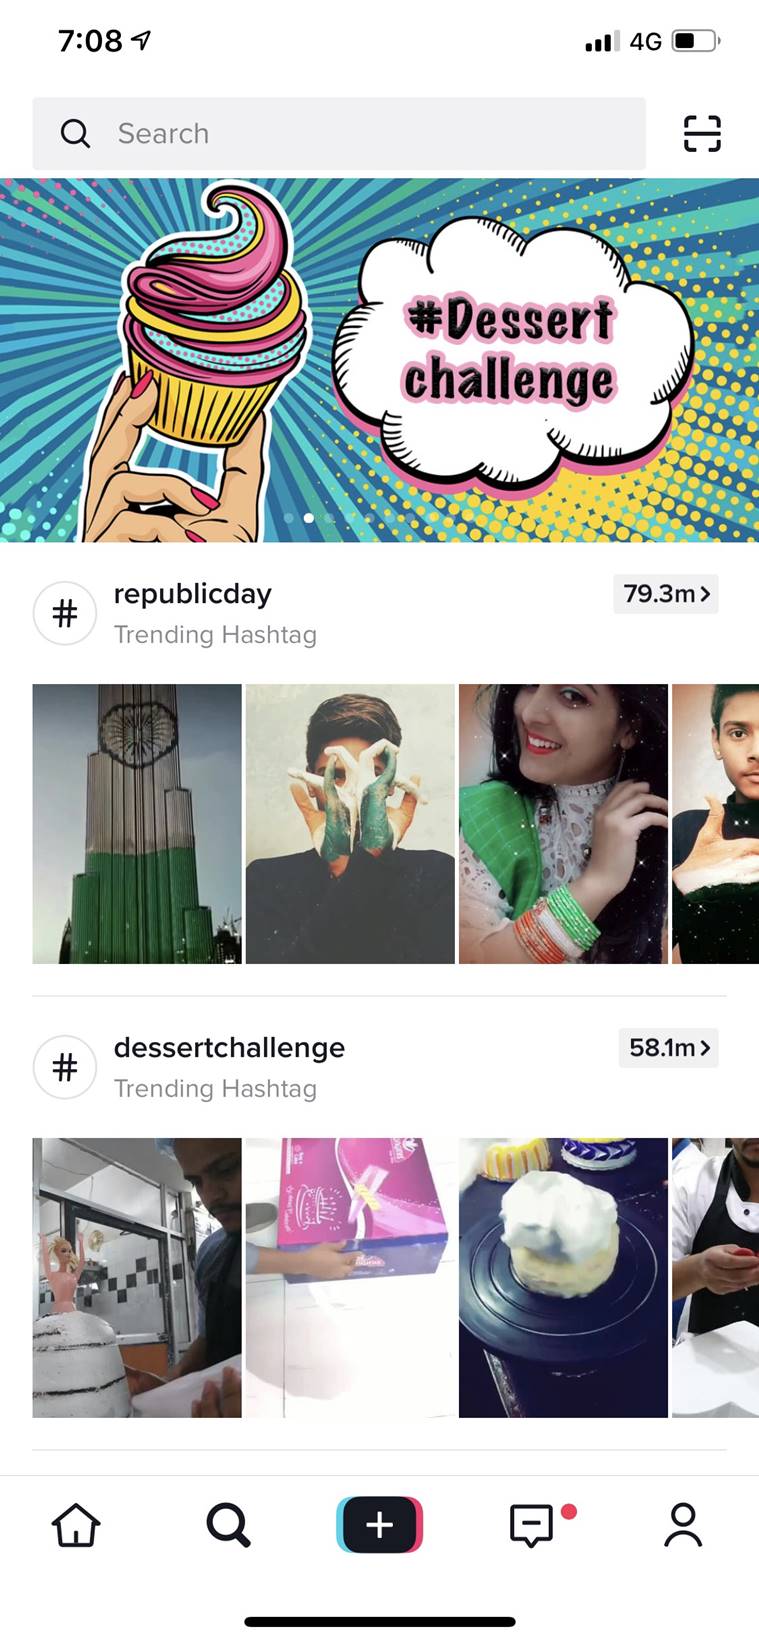   Teens from small towns to celebrities, it's TikTok's time 